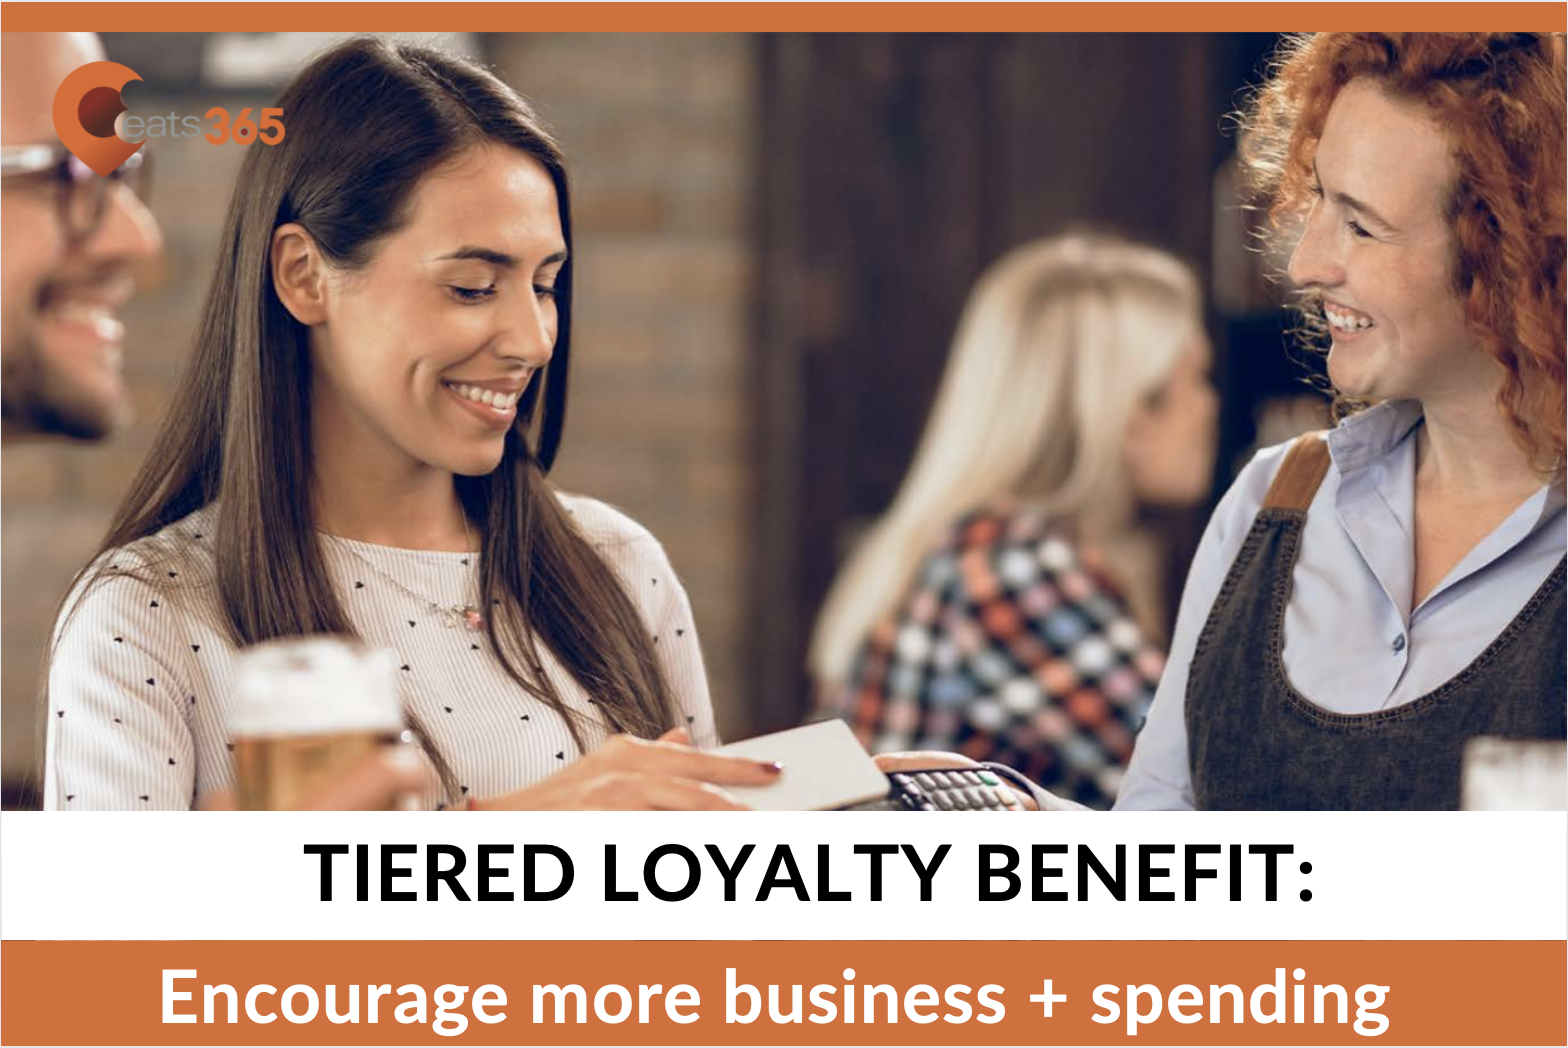 tiered loyalty program benefit: more business and spending